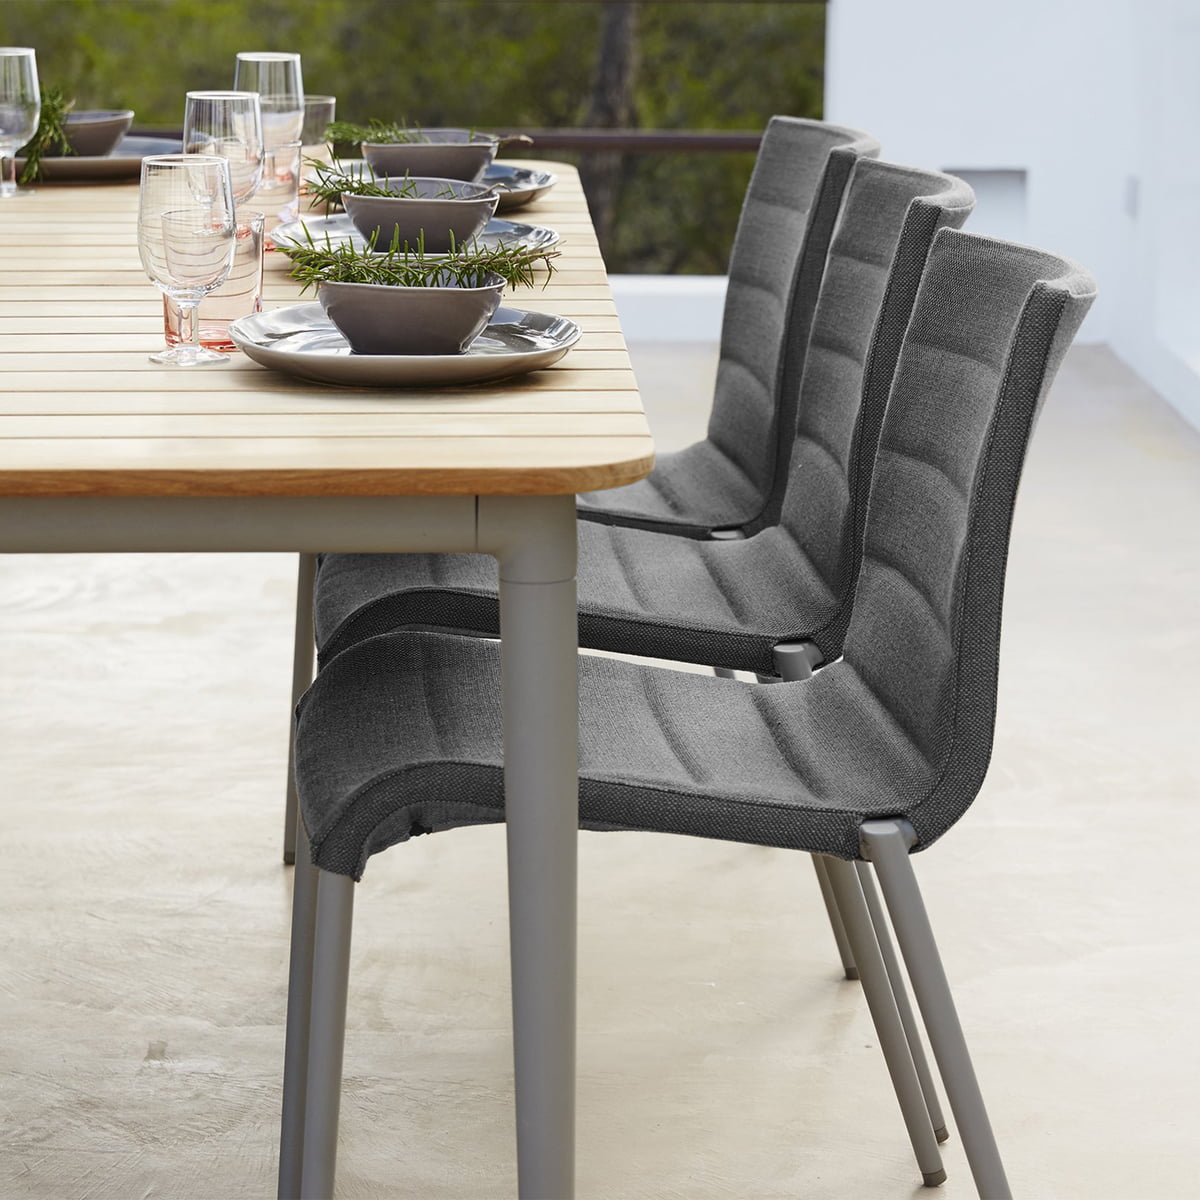 Cane-line | chair Connox - Core Outdoor